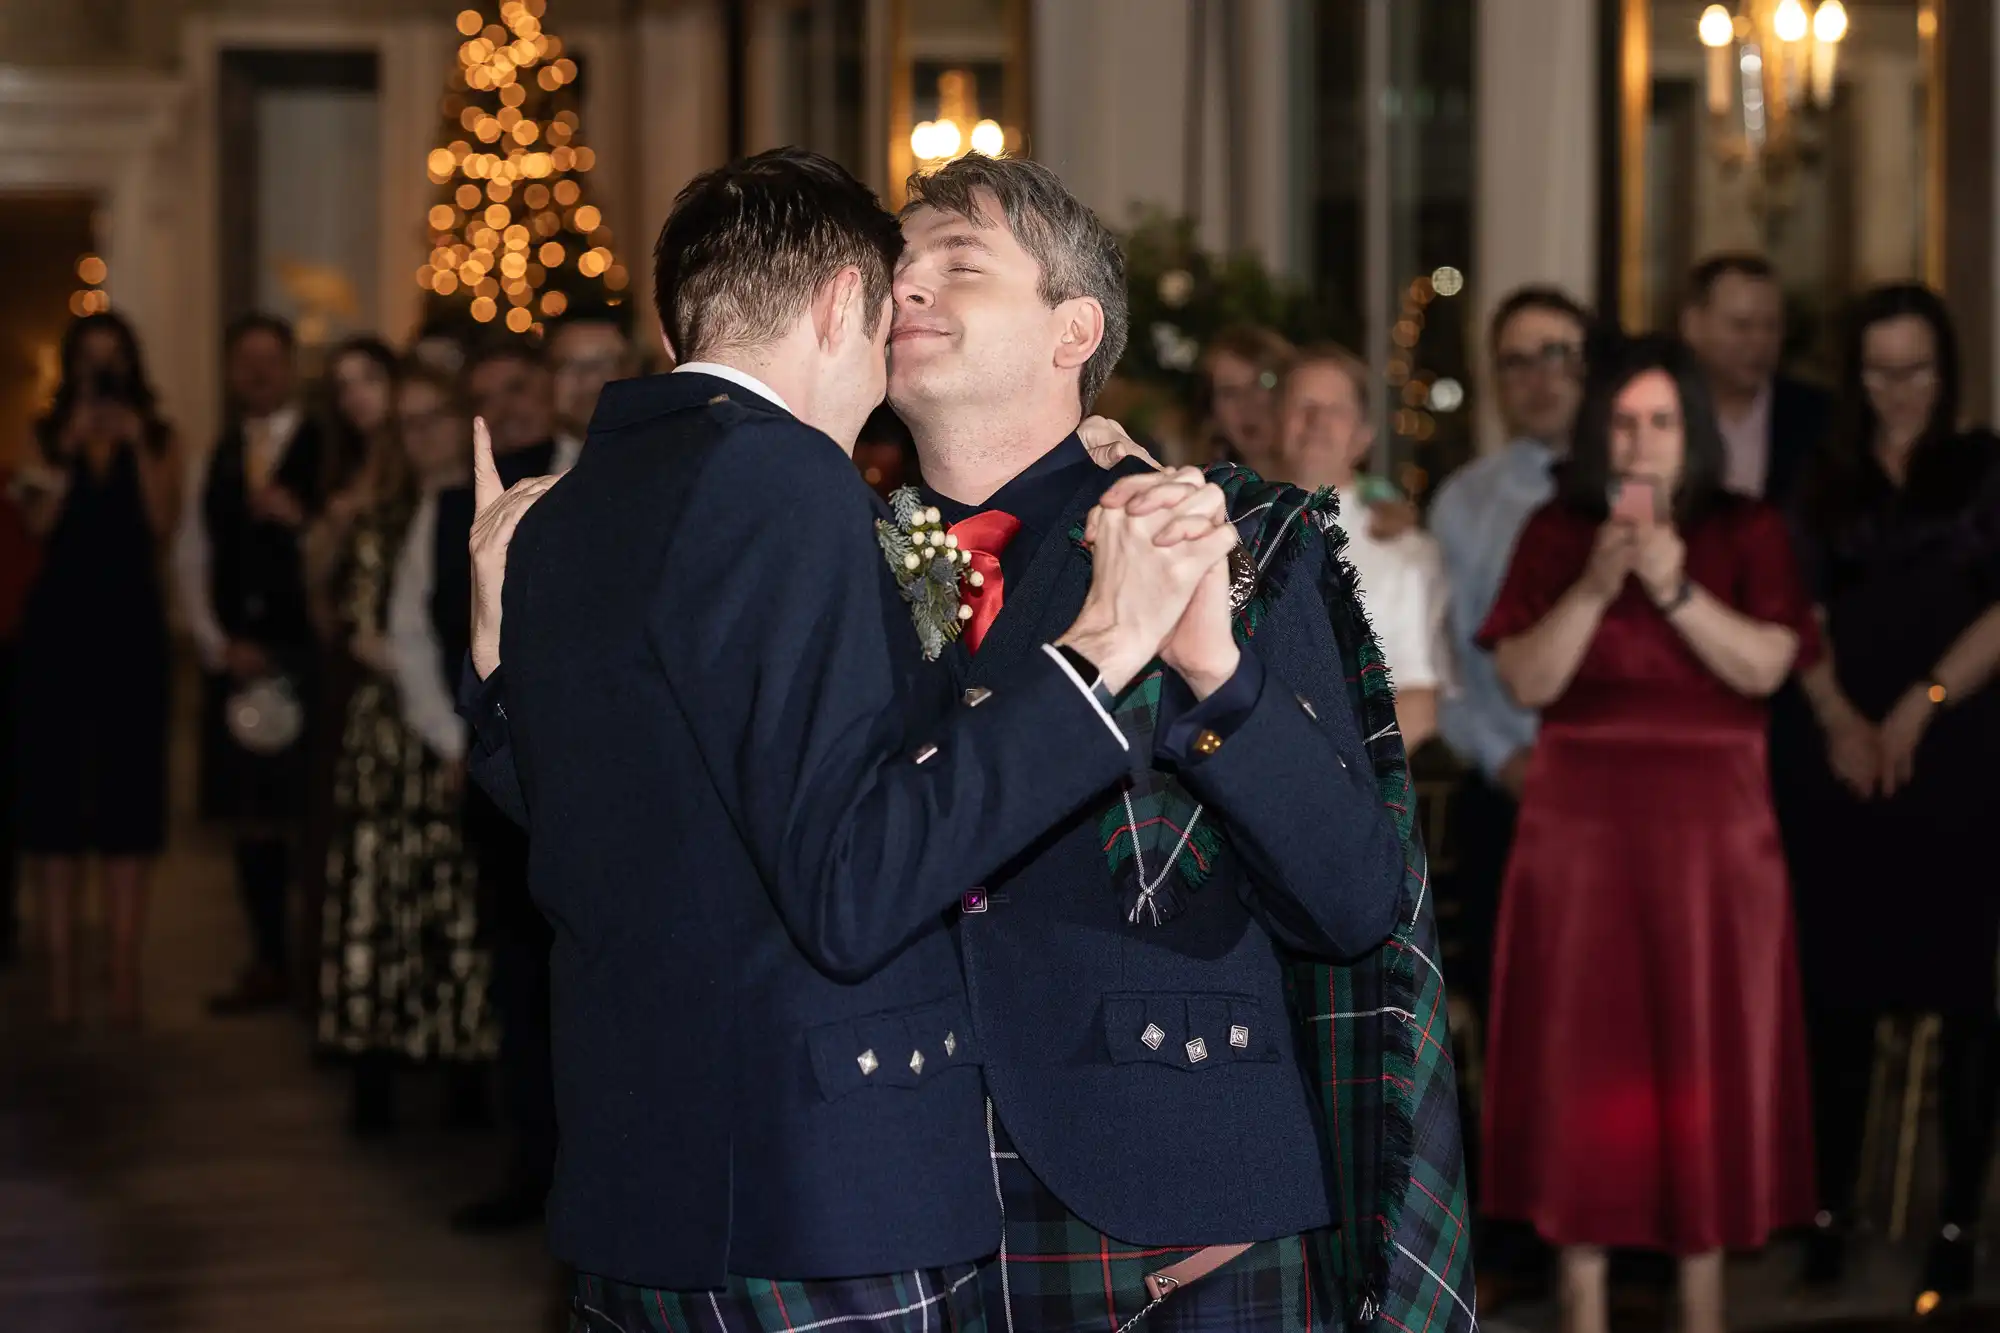 Two men dressed in suits and Scottish kilts share a dance at an indoor event with an audience watching in the background.